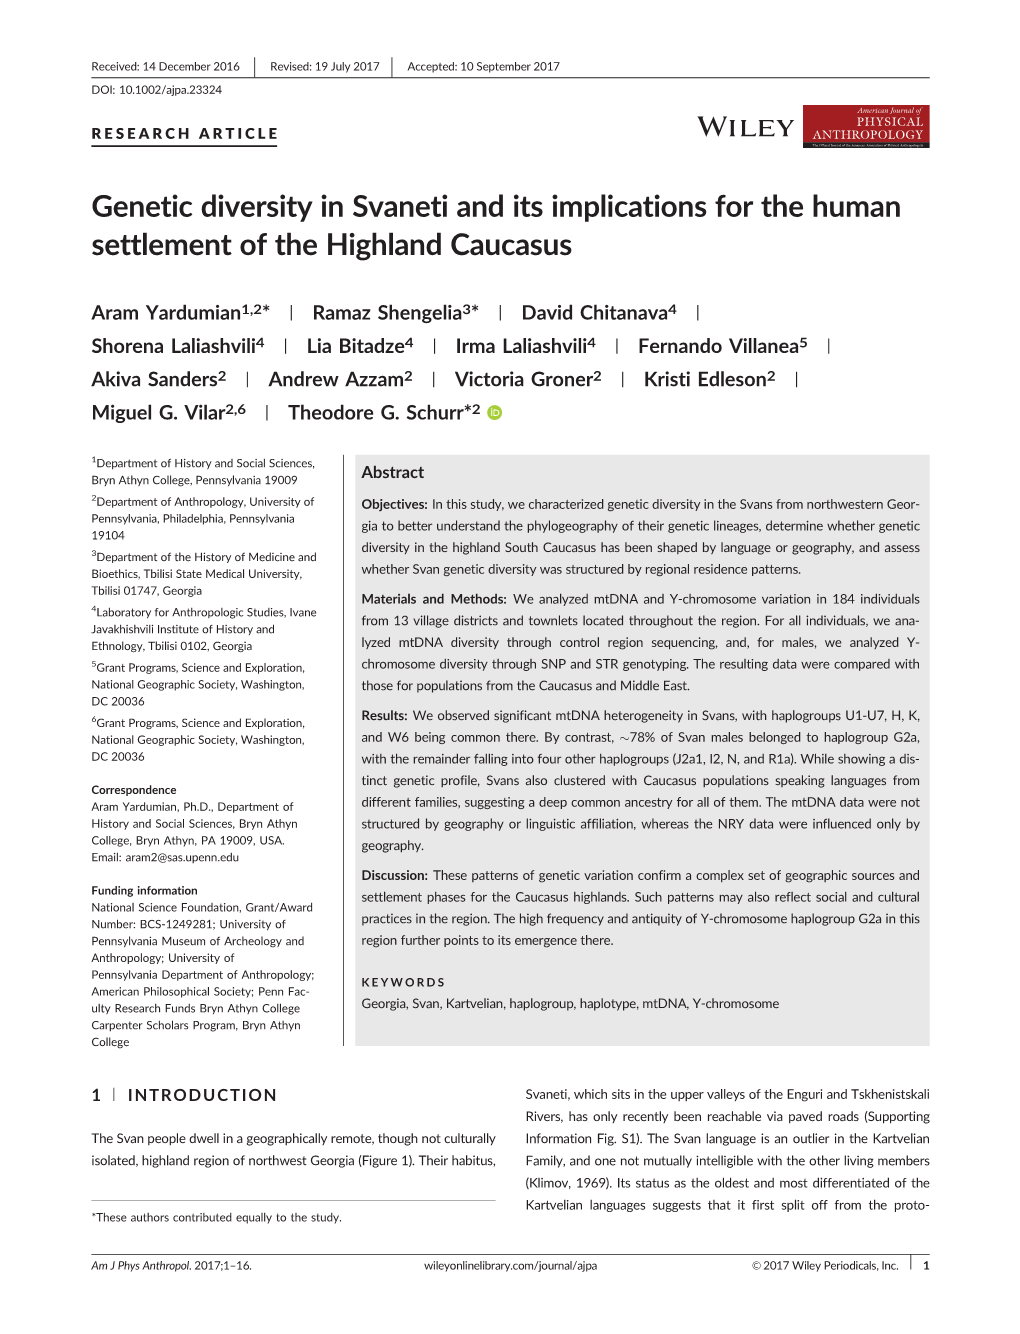 Genetic Diversity in Svaneti and Its Implications for the Human Settlement of the Highland Caucasus